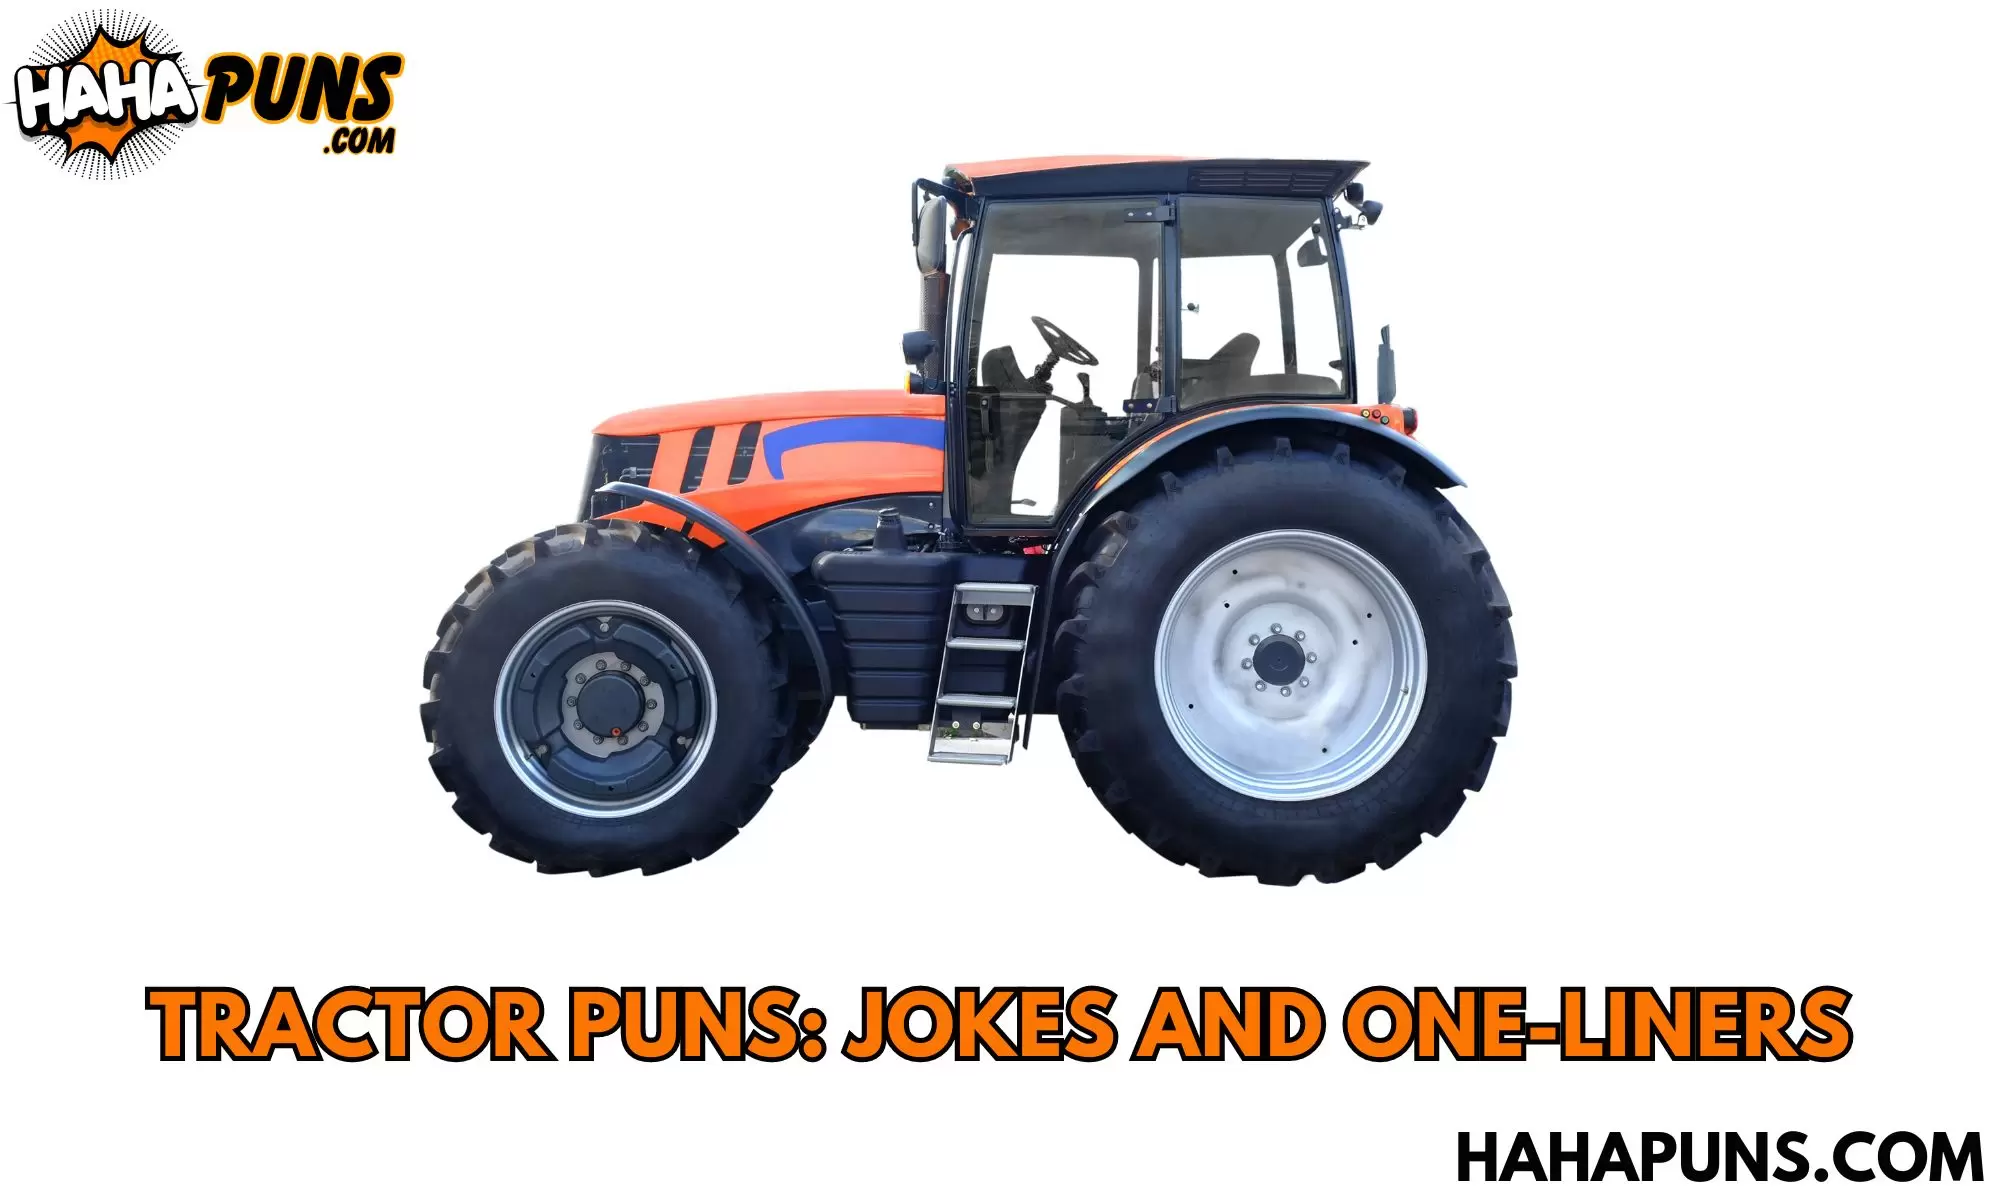 Tractor Puns: Jokes And One-Liners